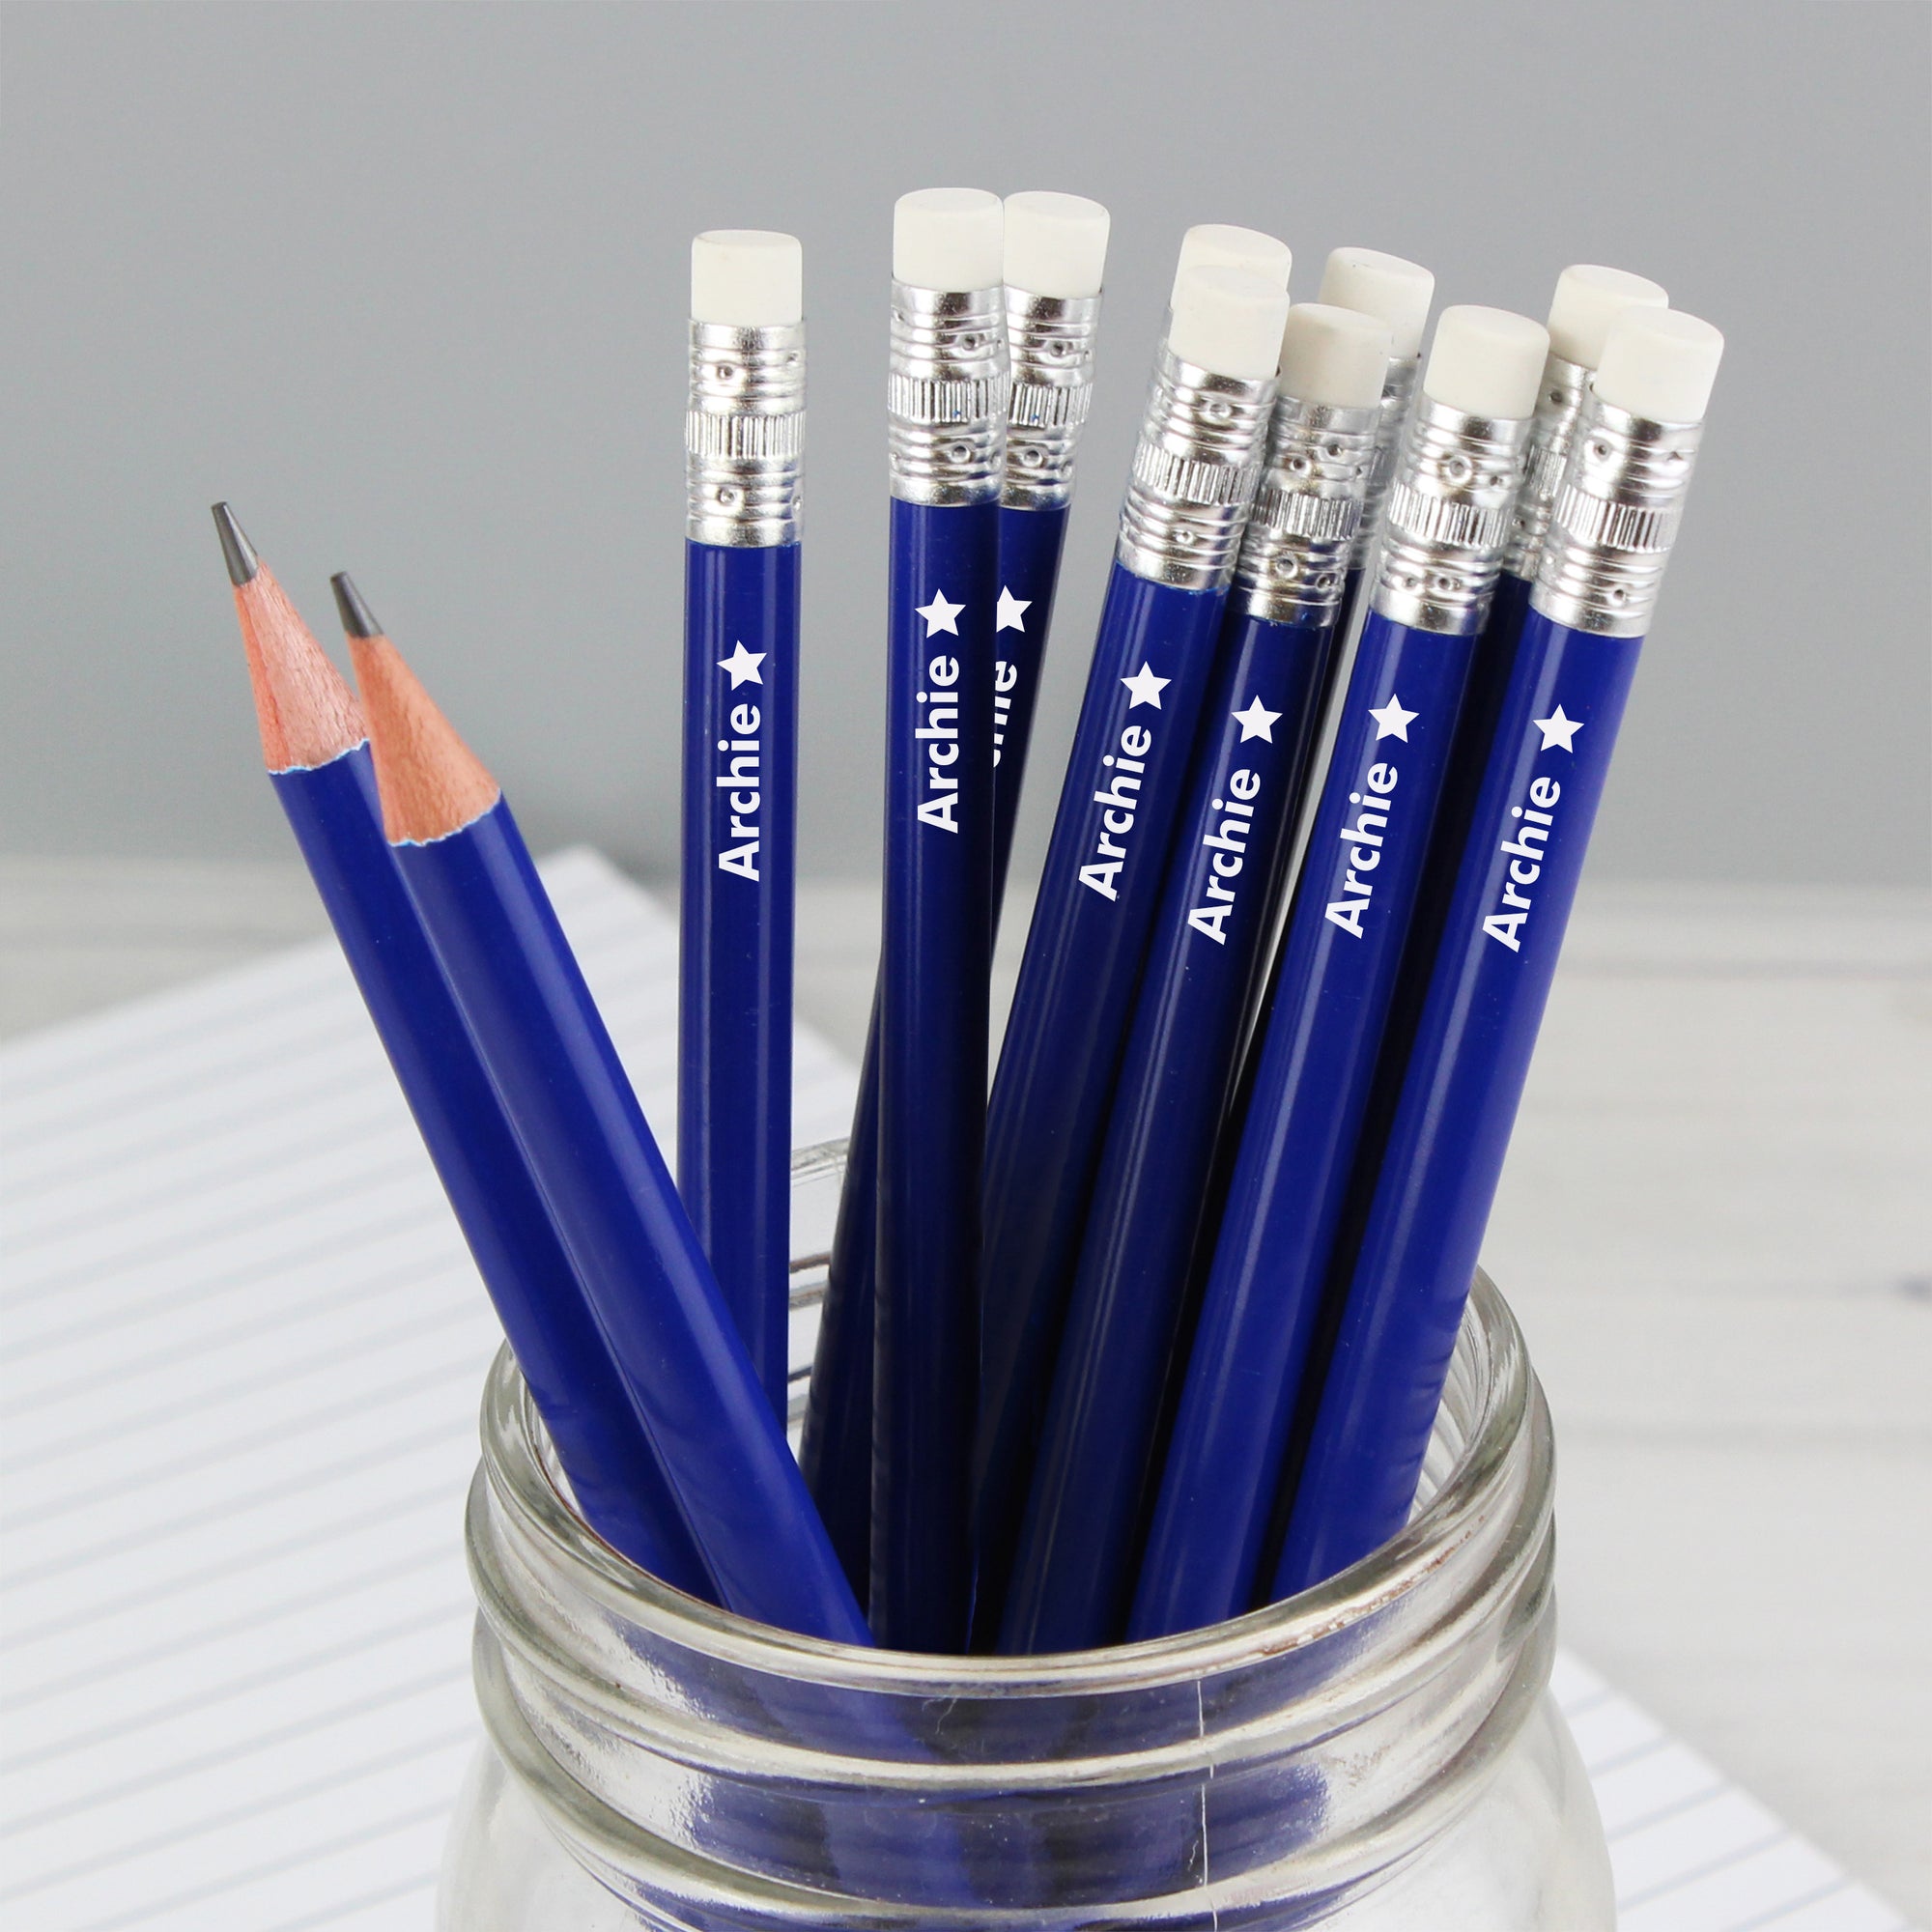 Image of a pack of 12 HB blue writing pencils that can be personalised with a name of your choice with a little star motif printed after the name.